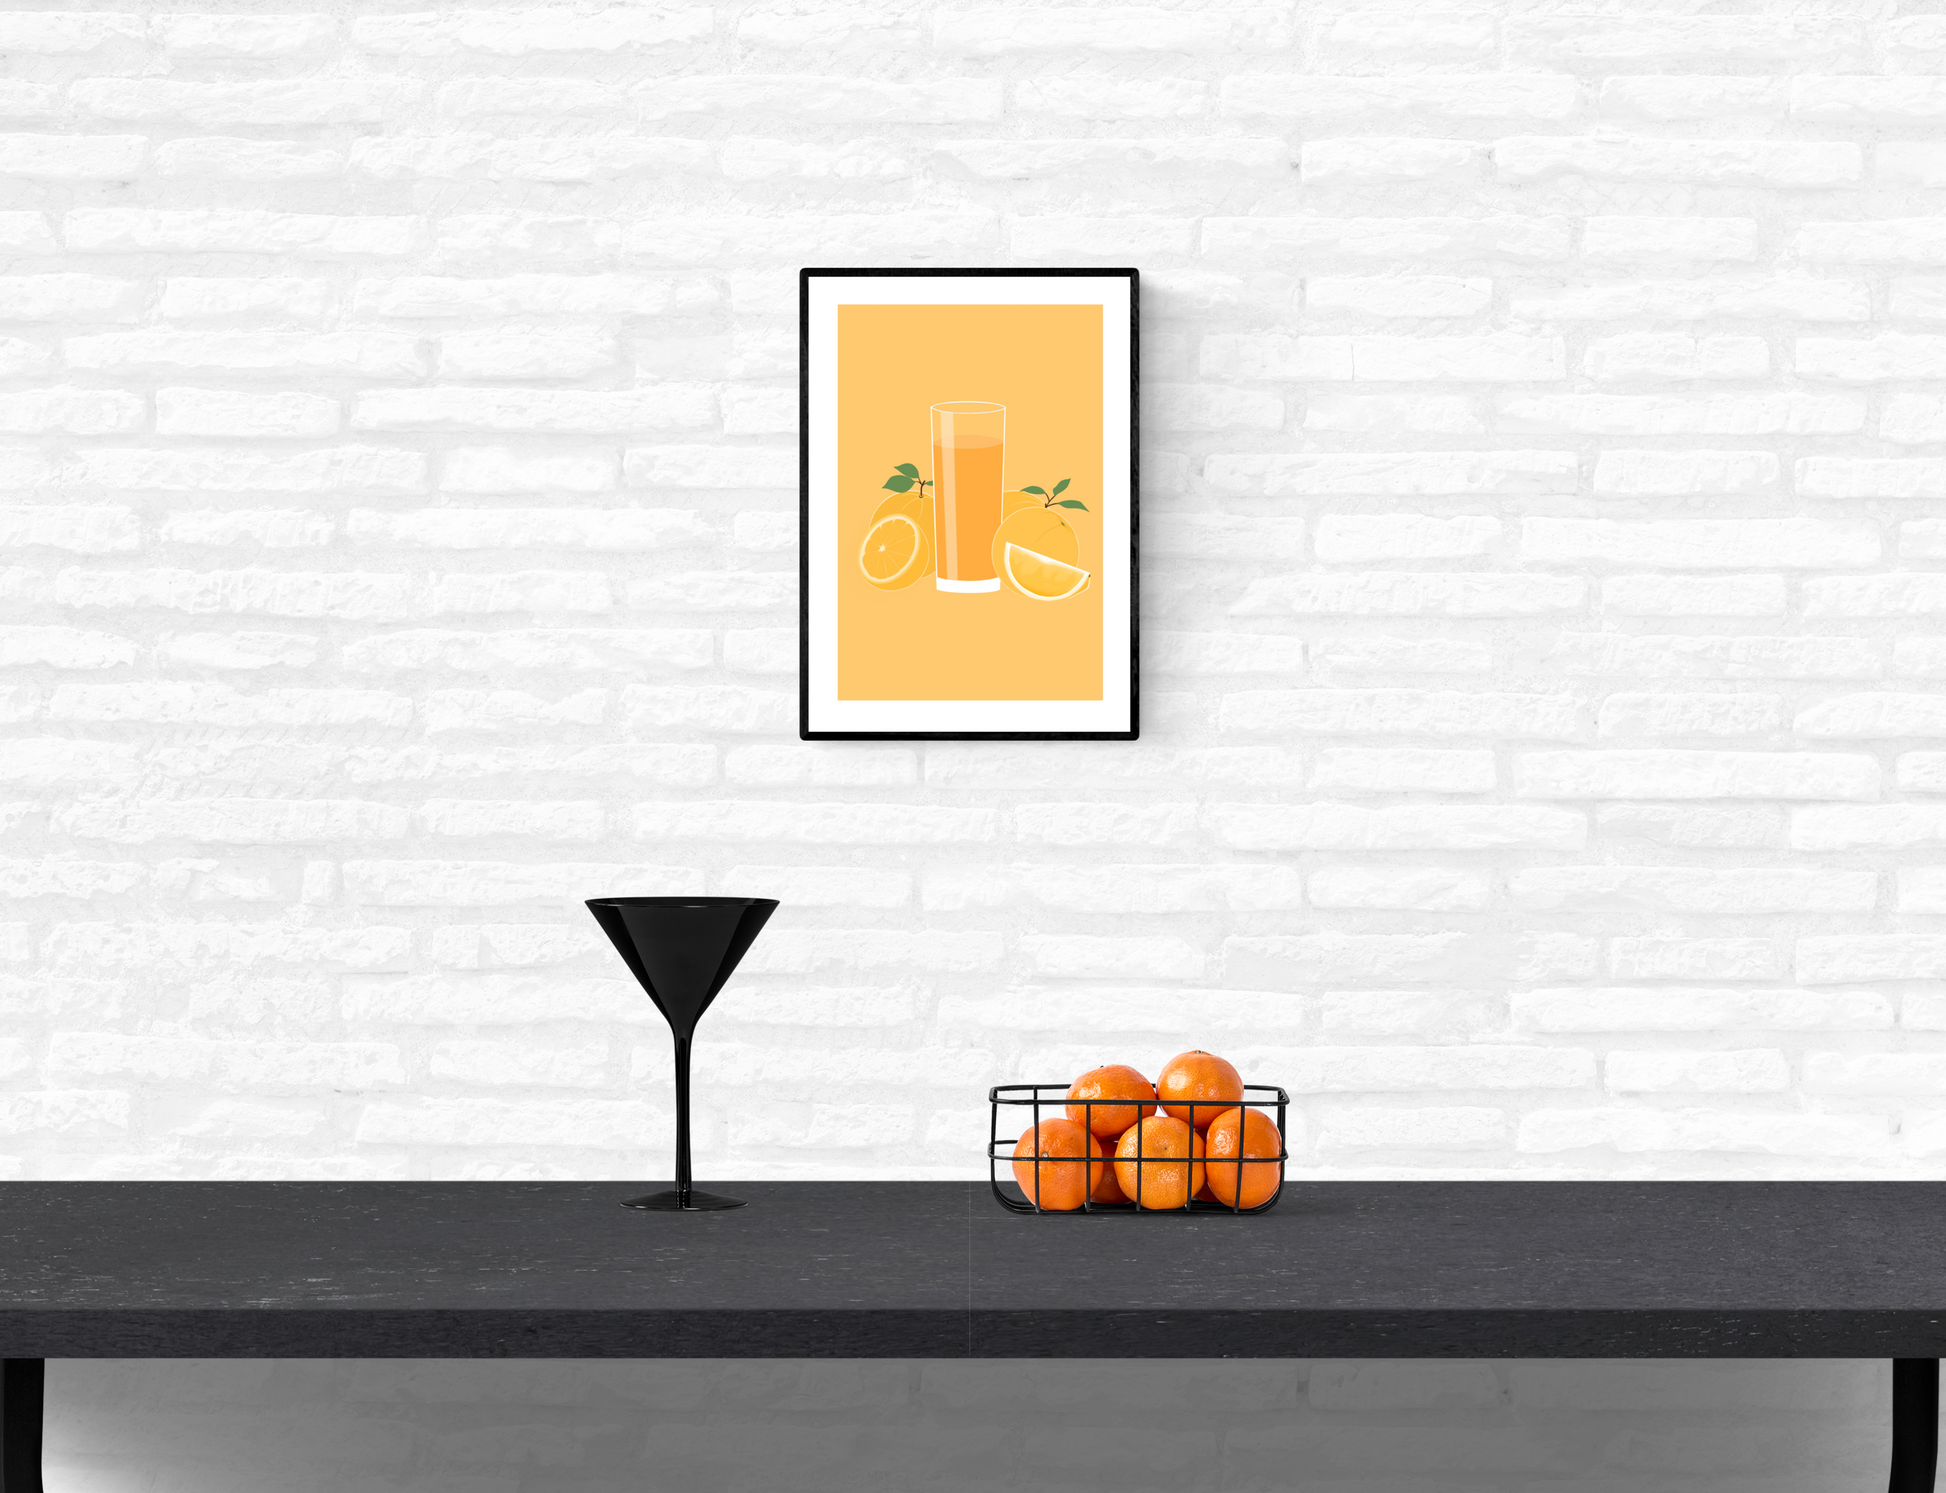 Framed wall art print of a tall cold glass of orange juice with orange fruits surrounding the glass mounted on a home’s interior white brick wall